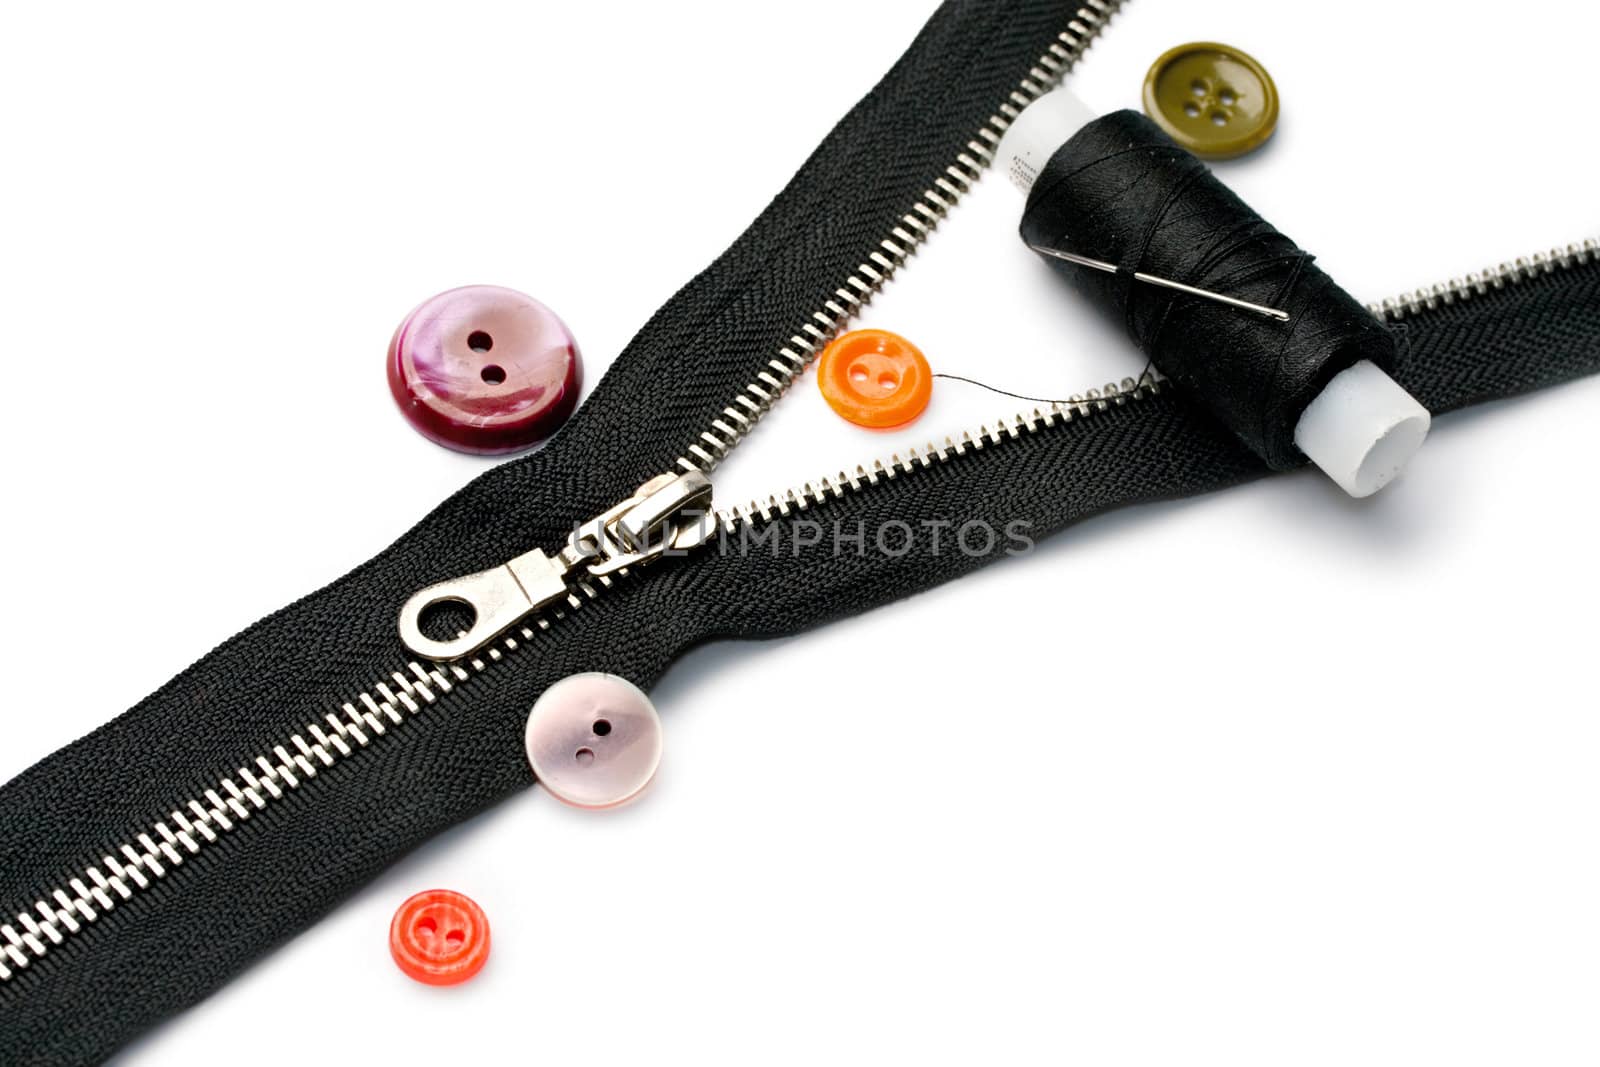 Zipper, thread and button isolated on white by Garsya